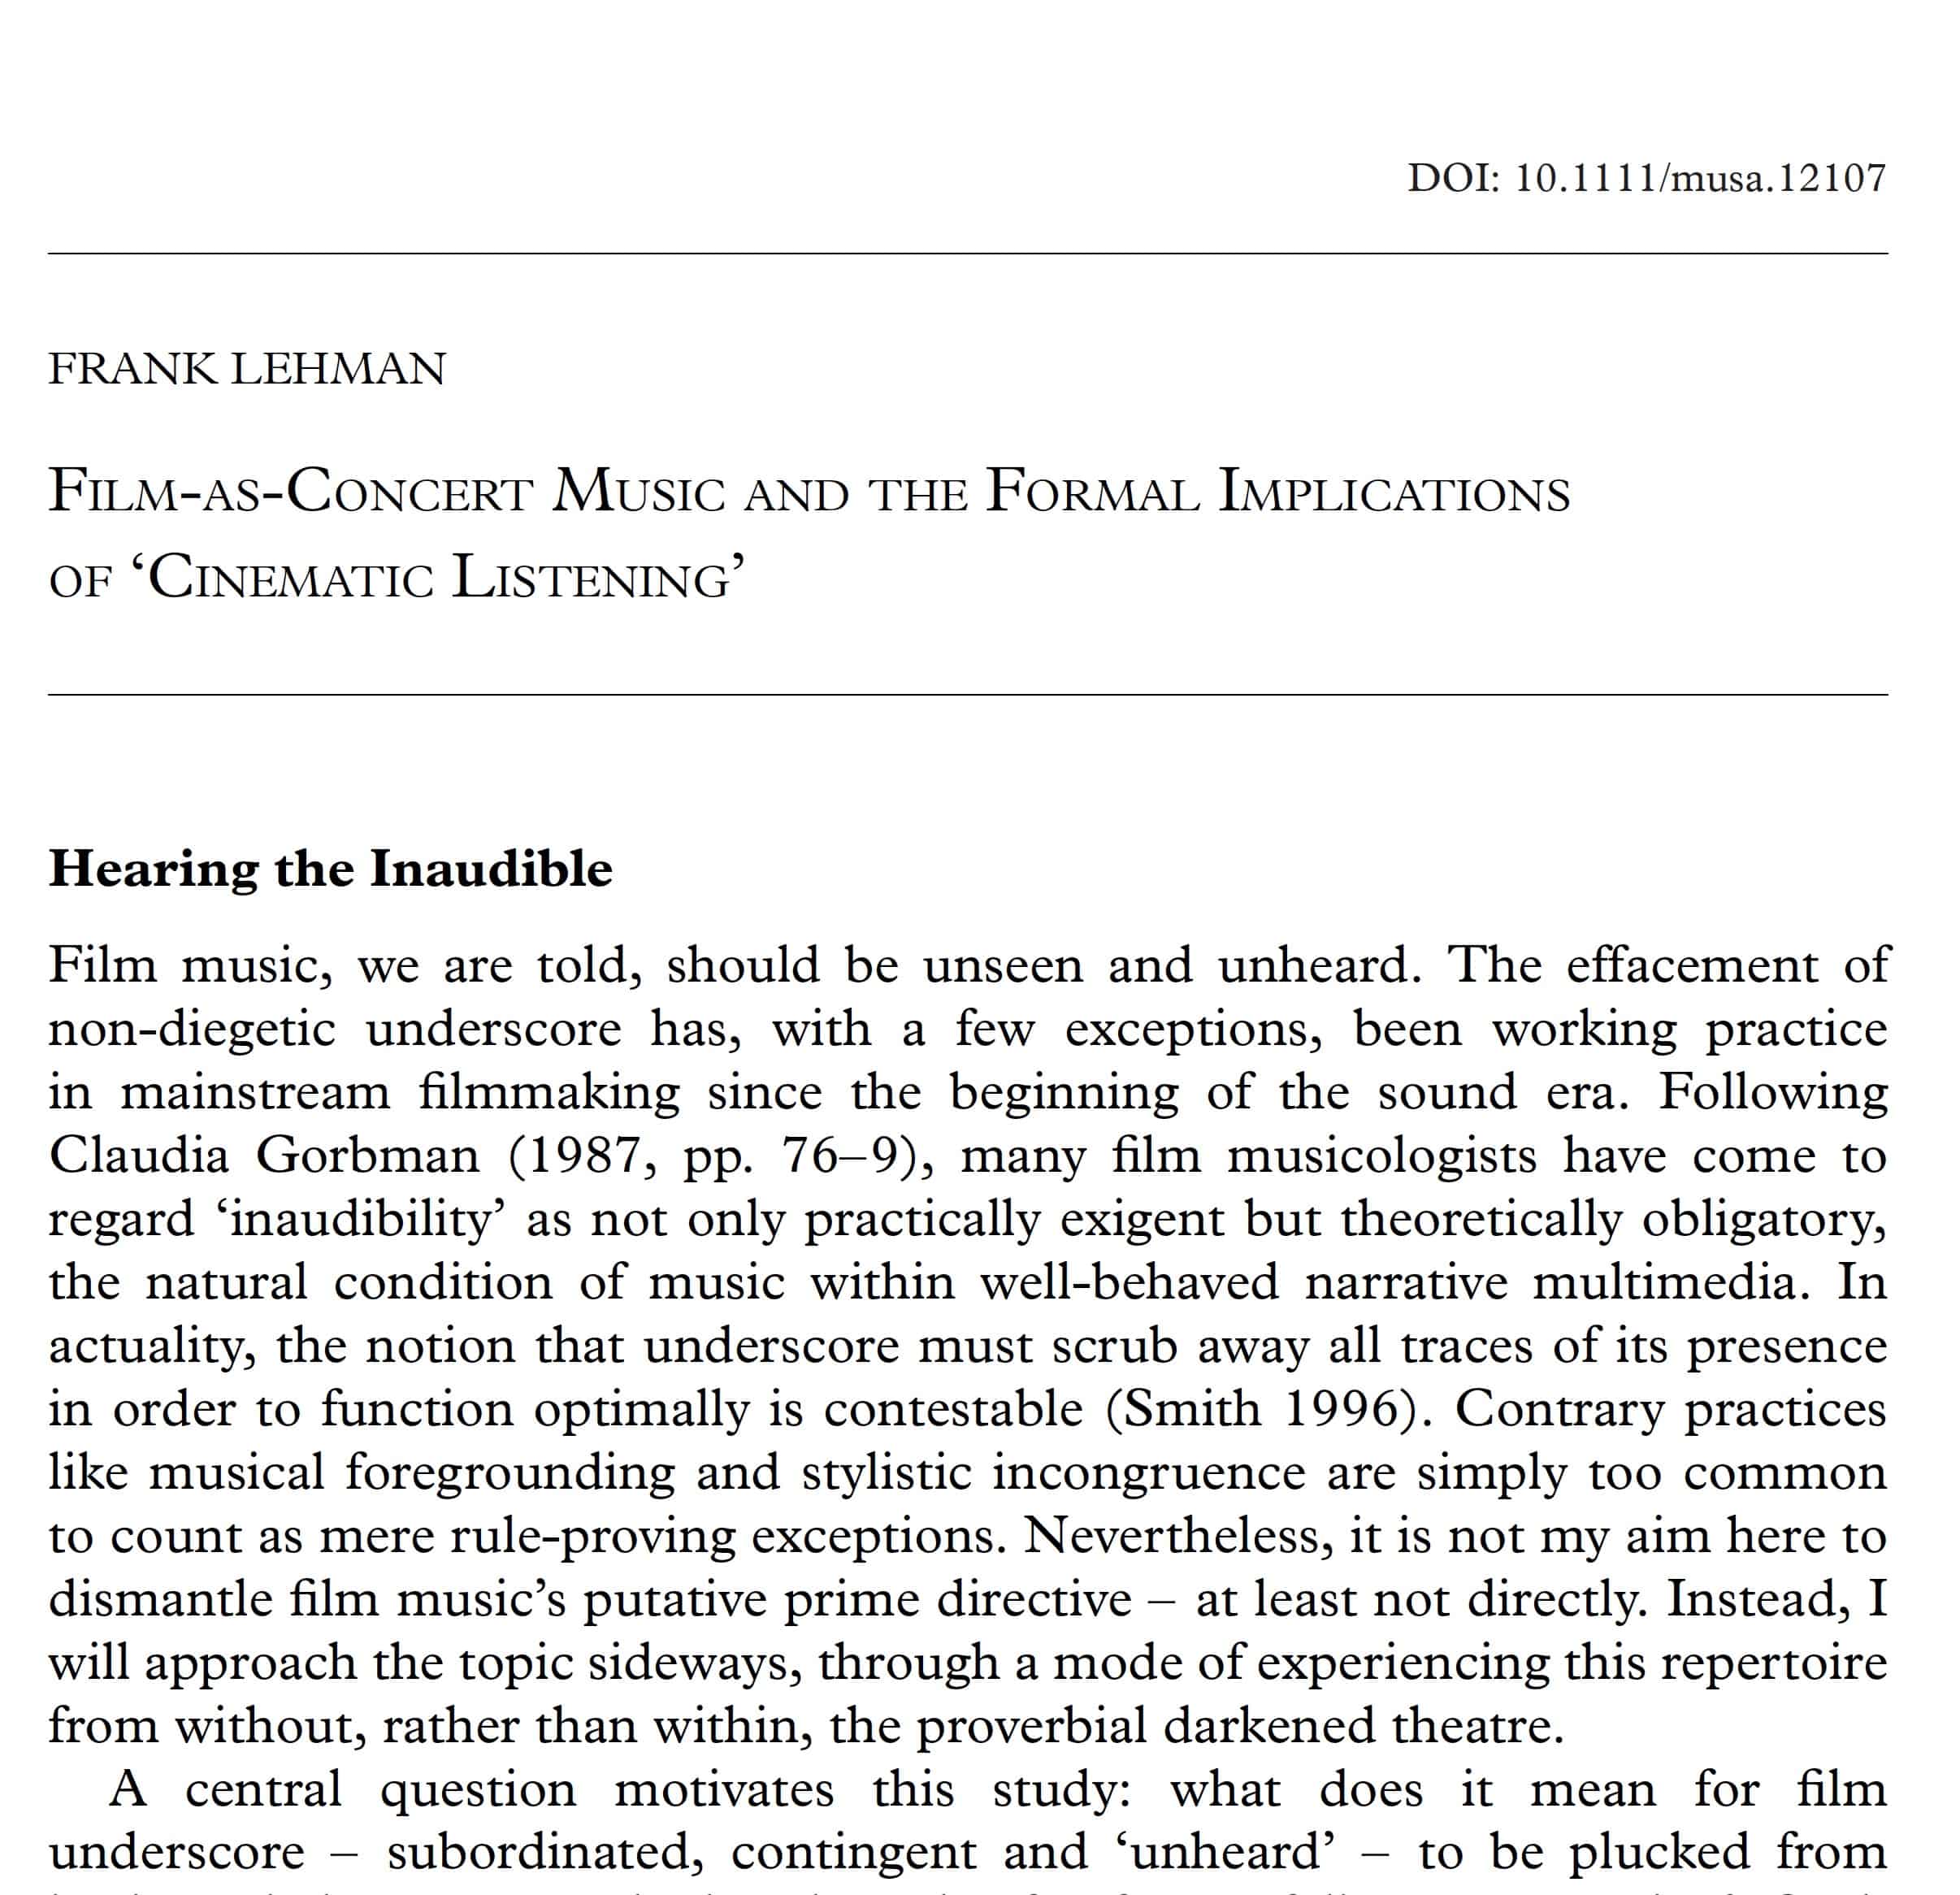 Frank Lehman’s Paper Film-as-Concert Music and the Formal Implications of ‘Cinematic Listening’